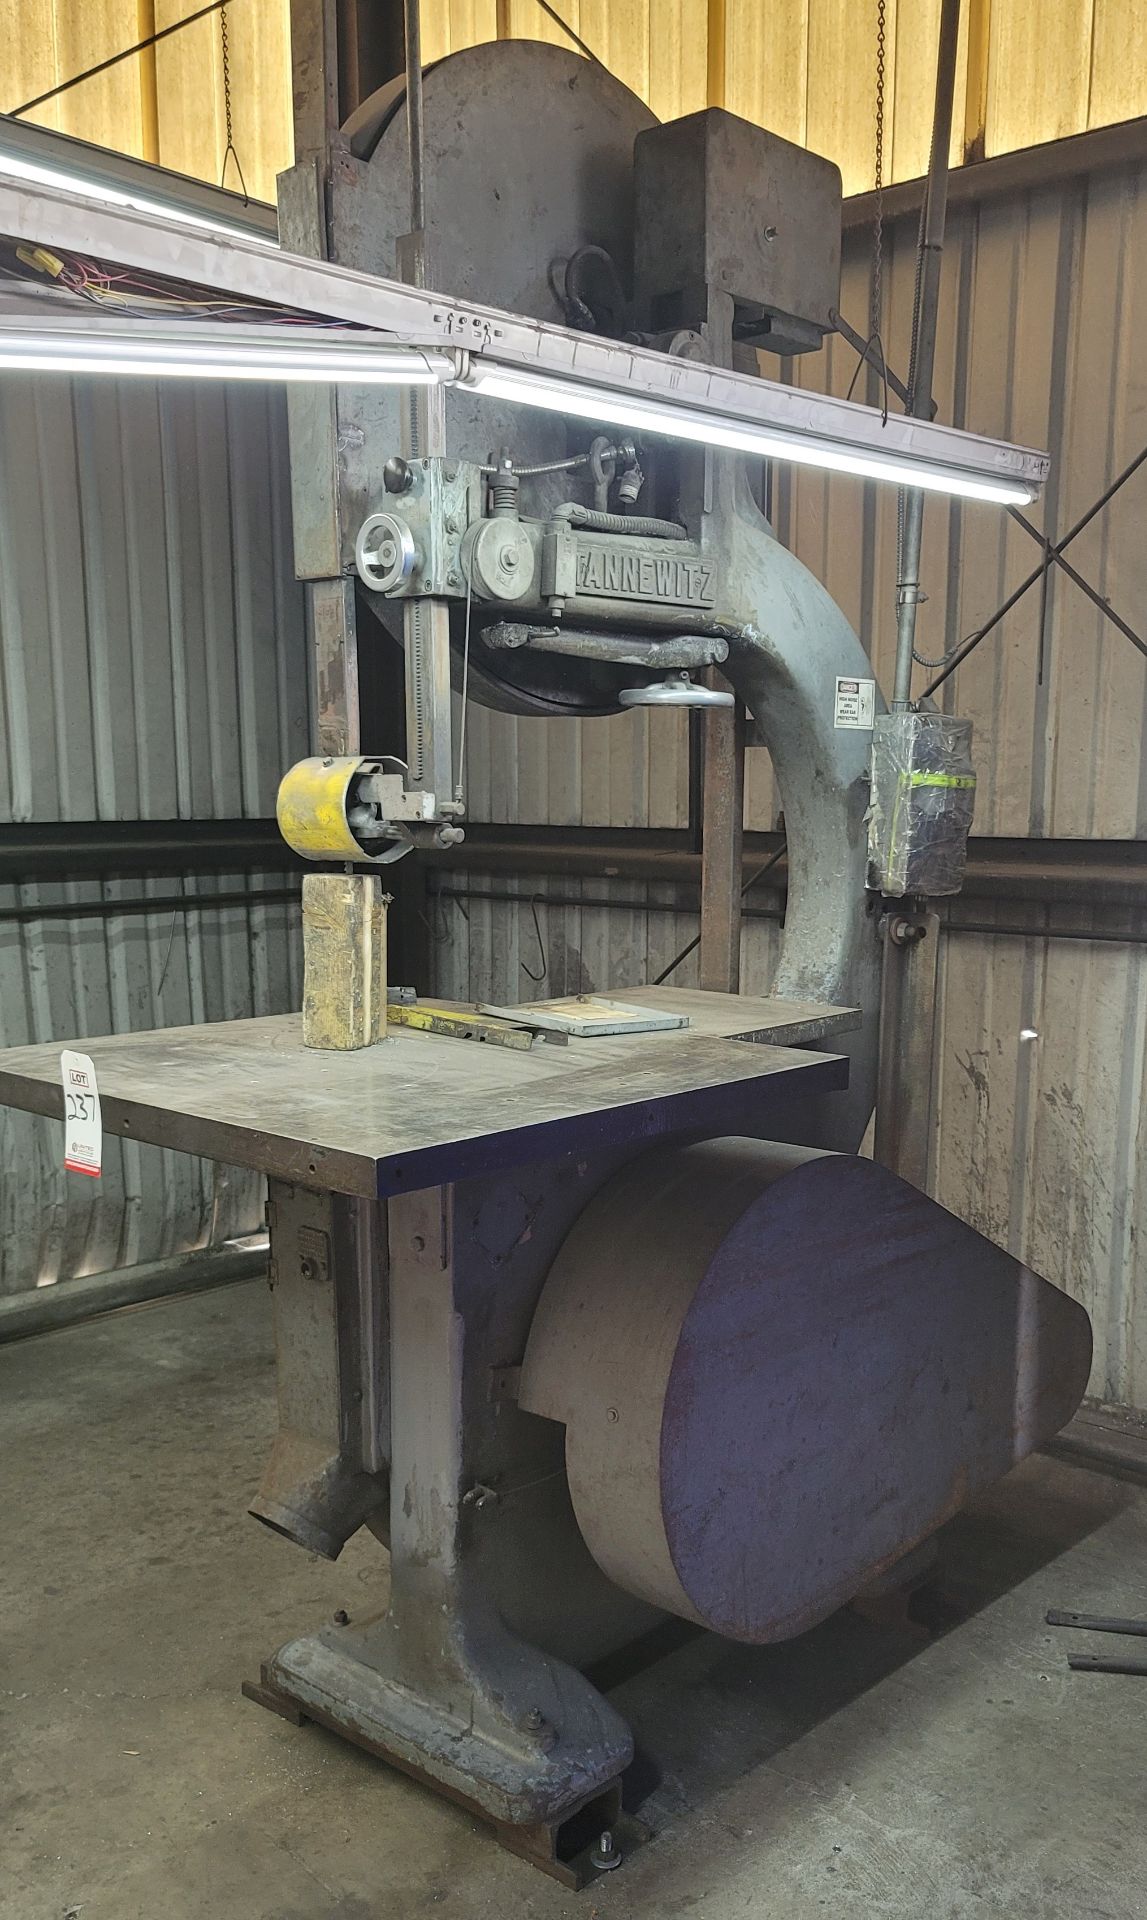 TANNEWITZ VERTICAL BAND SAW, MODEL GV-1E, 35-1/4" THROAT - Image 2 of 2